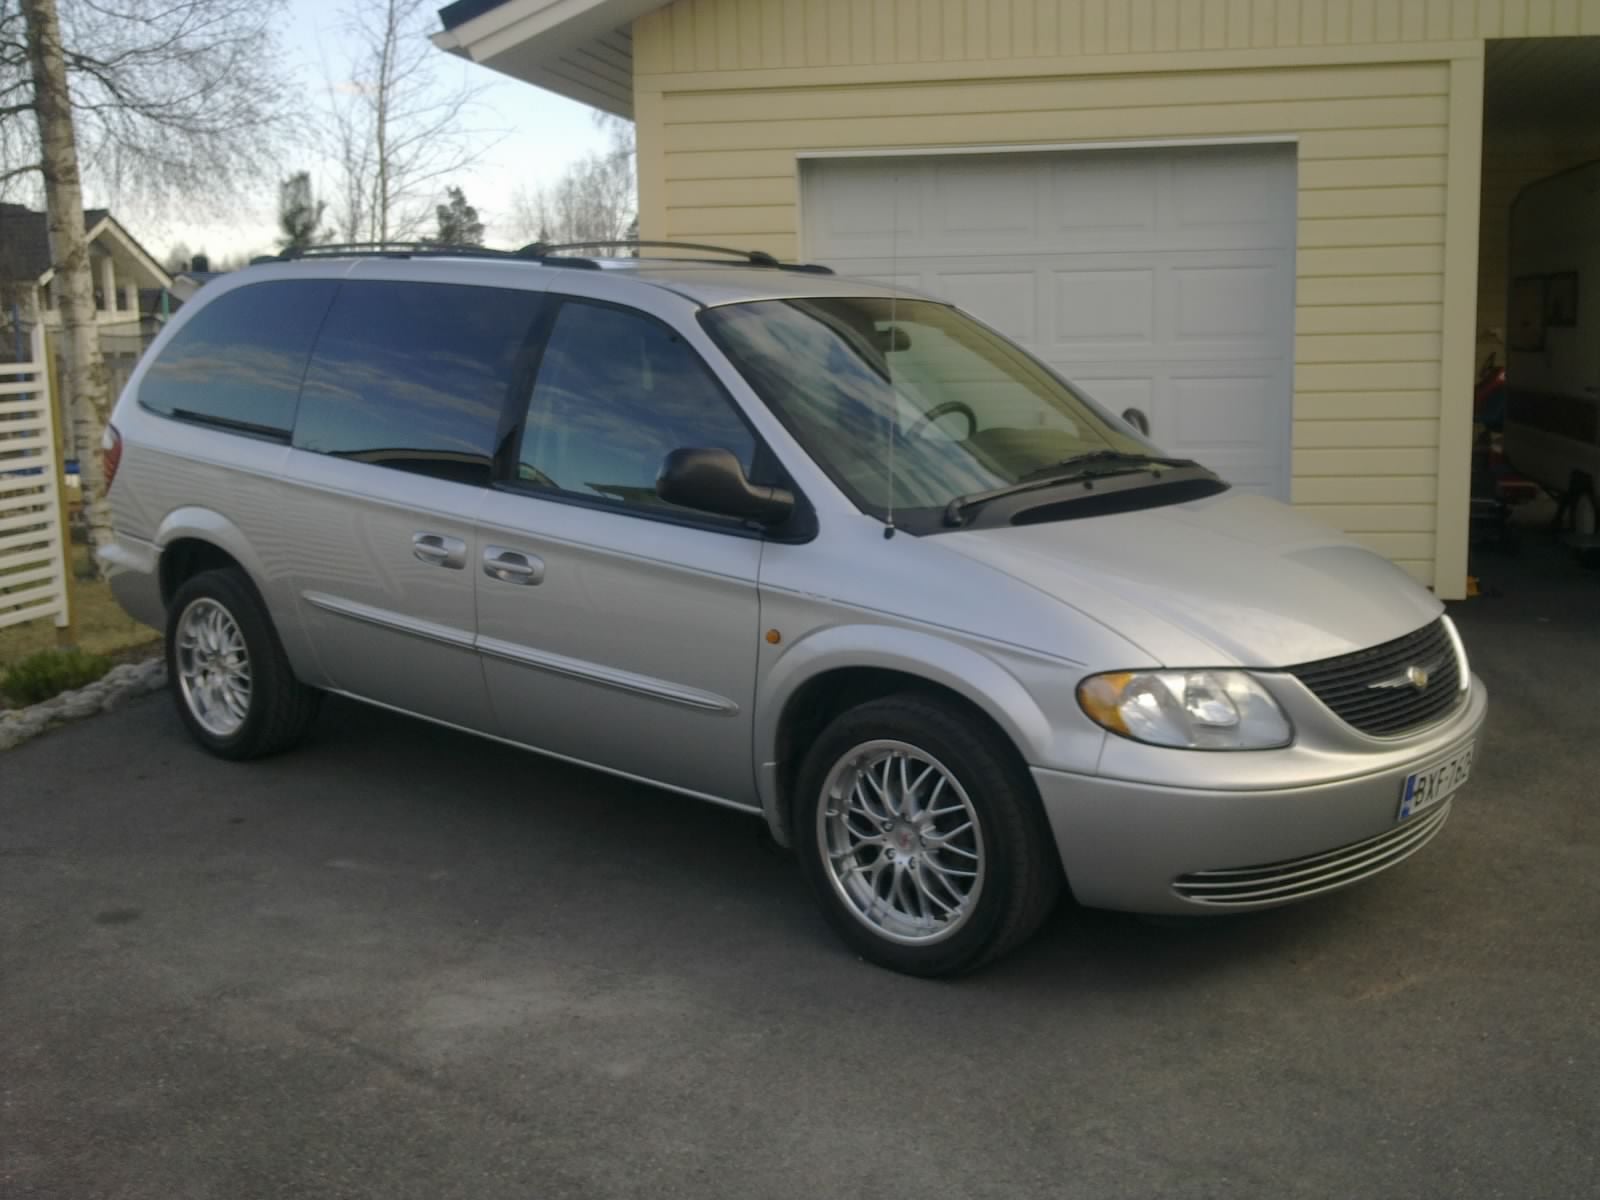 2003 Chrysler town and country brake problems